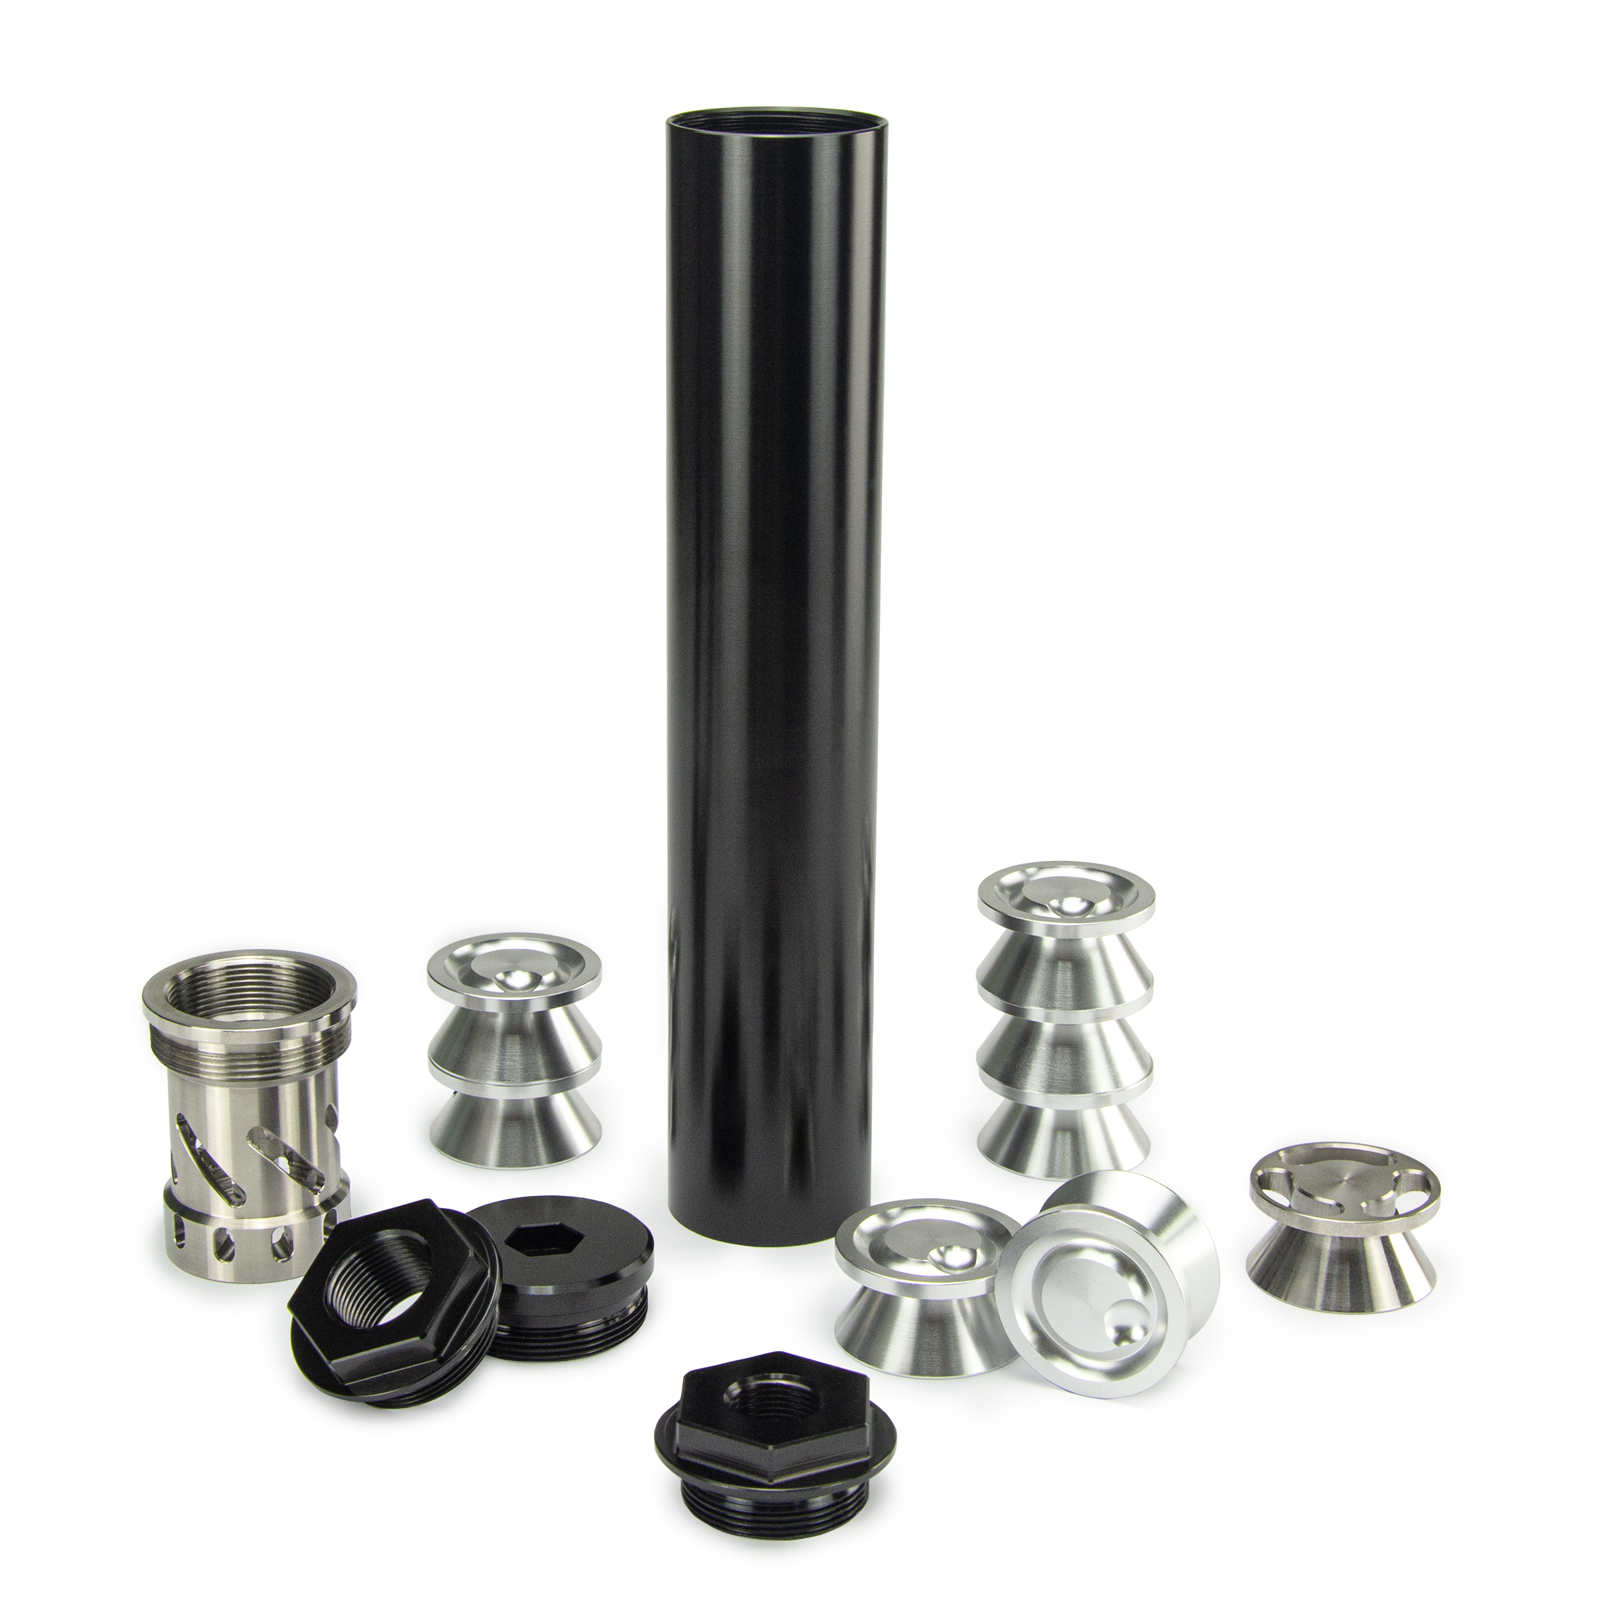 

Tactical Accessories 1.25"OD 7"L K Cup Solvent Filter Trap 1-3/16x24 TPI 1x Stainless Steel Cup 7x Aluminum Cups 1/2x28+5/8x24 End Caps Napa 4003